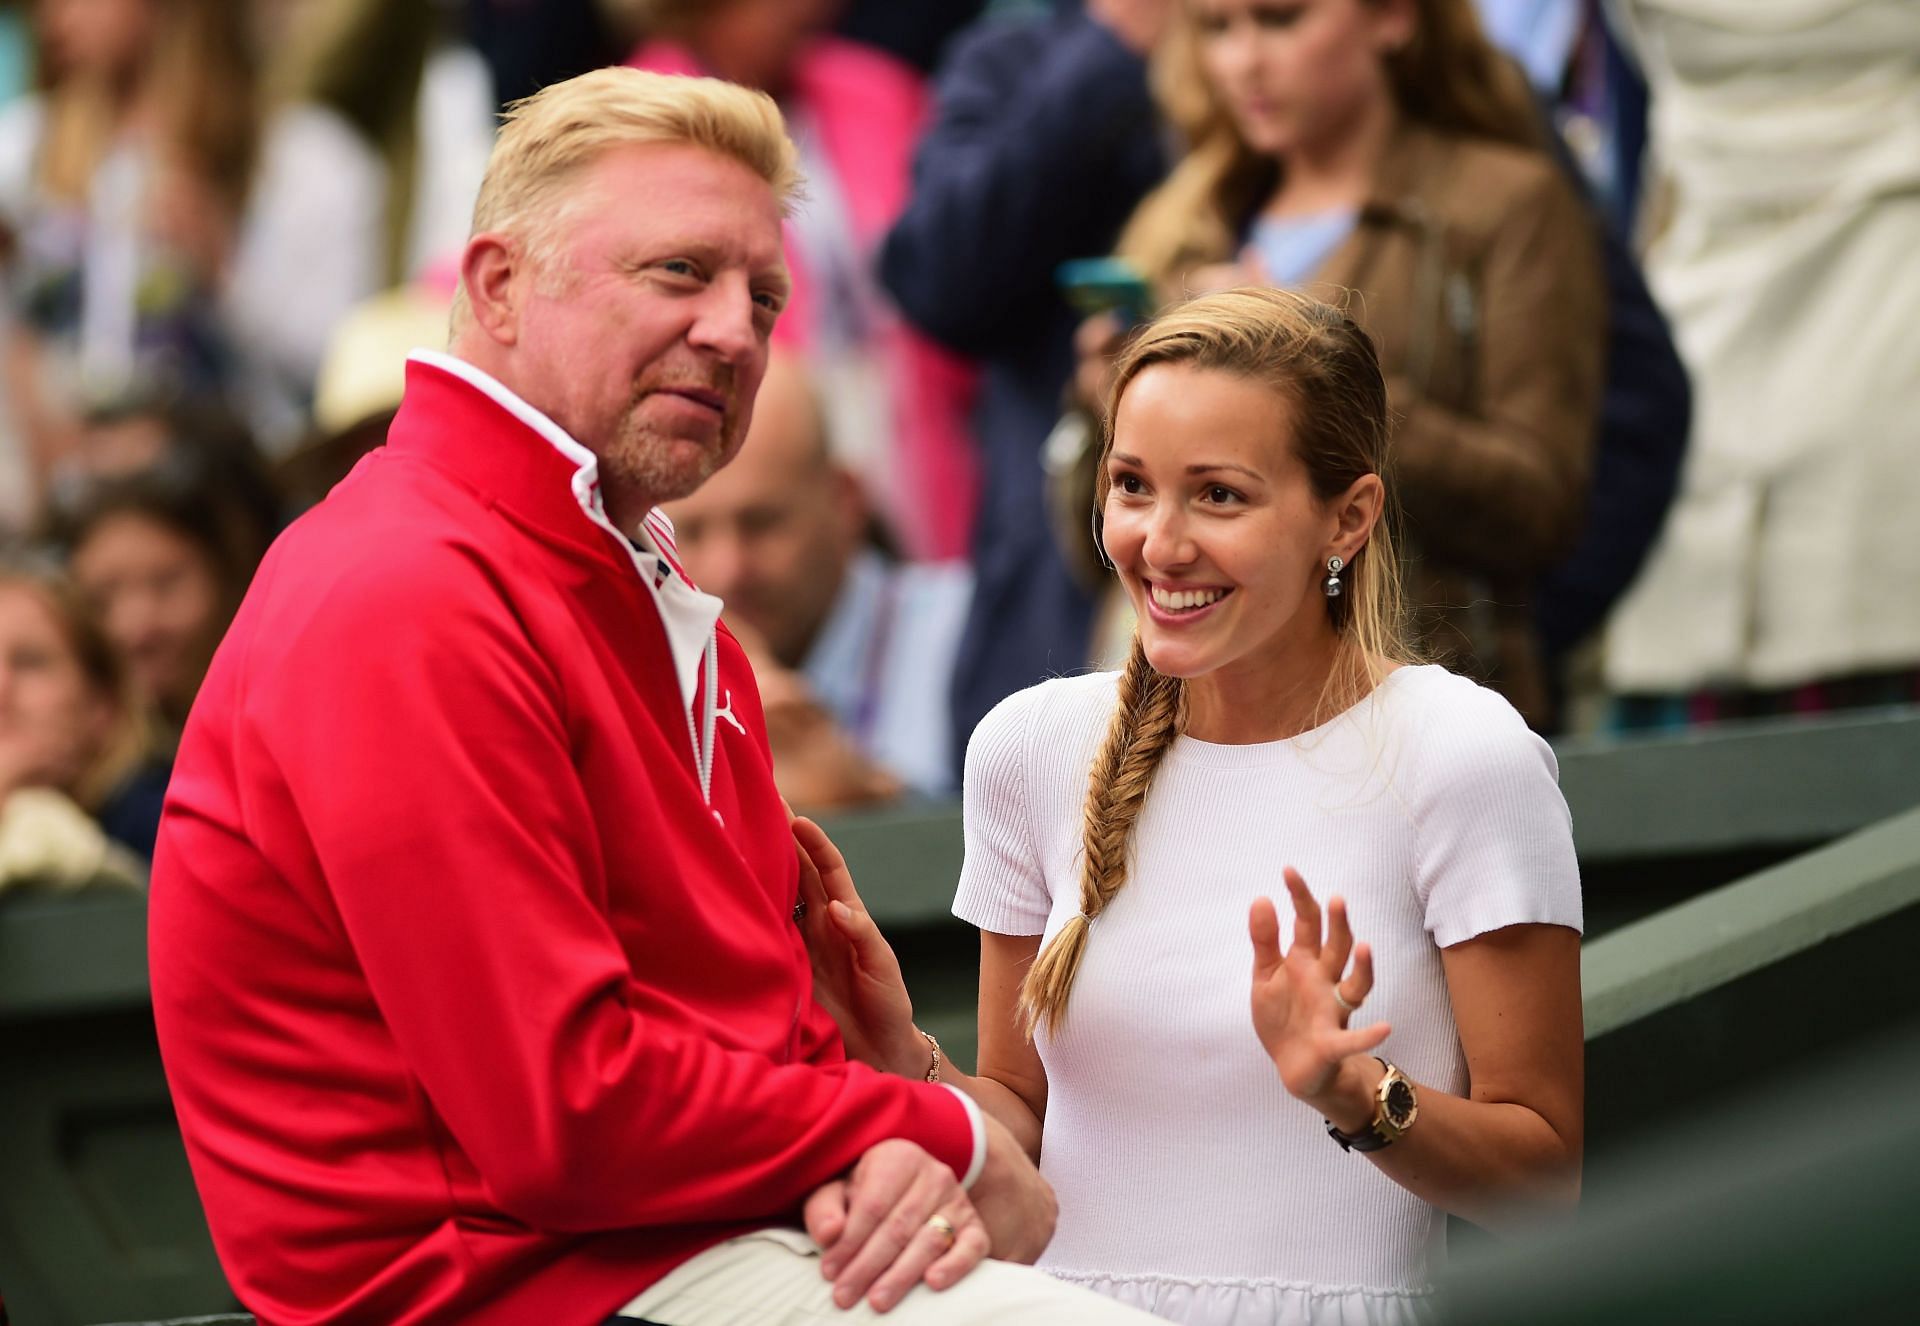 Boris Becker pictured with Novak Djokovic&#039;s wife Jelena at Wimbledon 2015, which was also attended by Virat Kohli